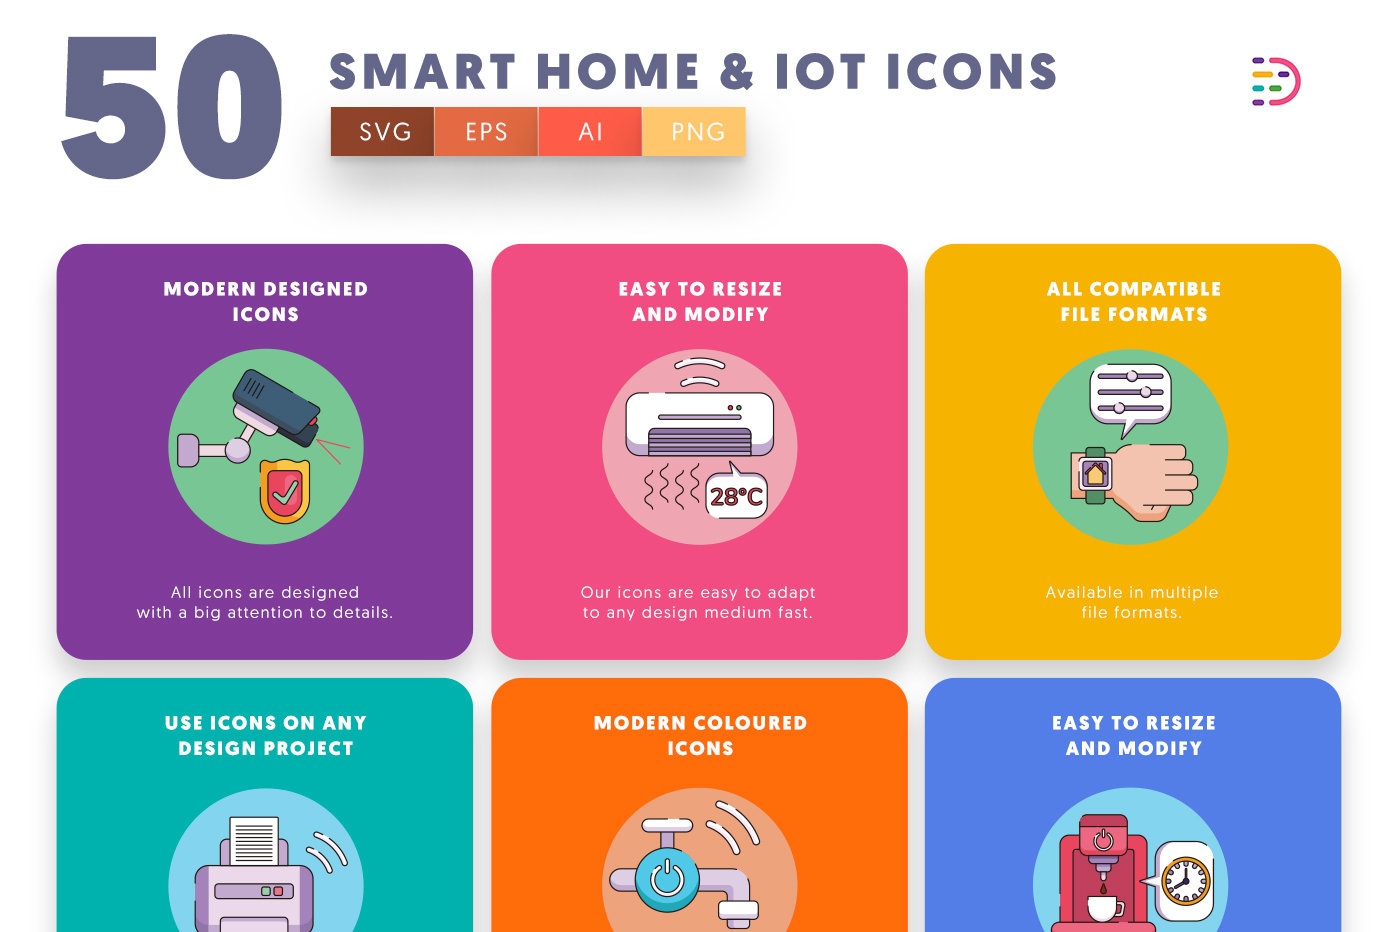  Smart home and IoT Icons with colored backgrounds